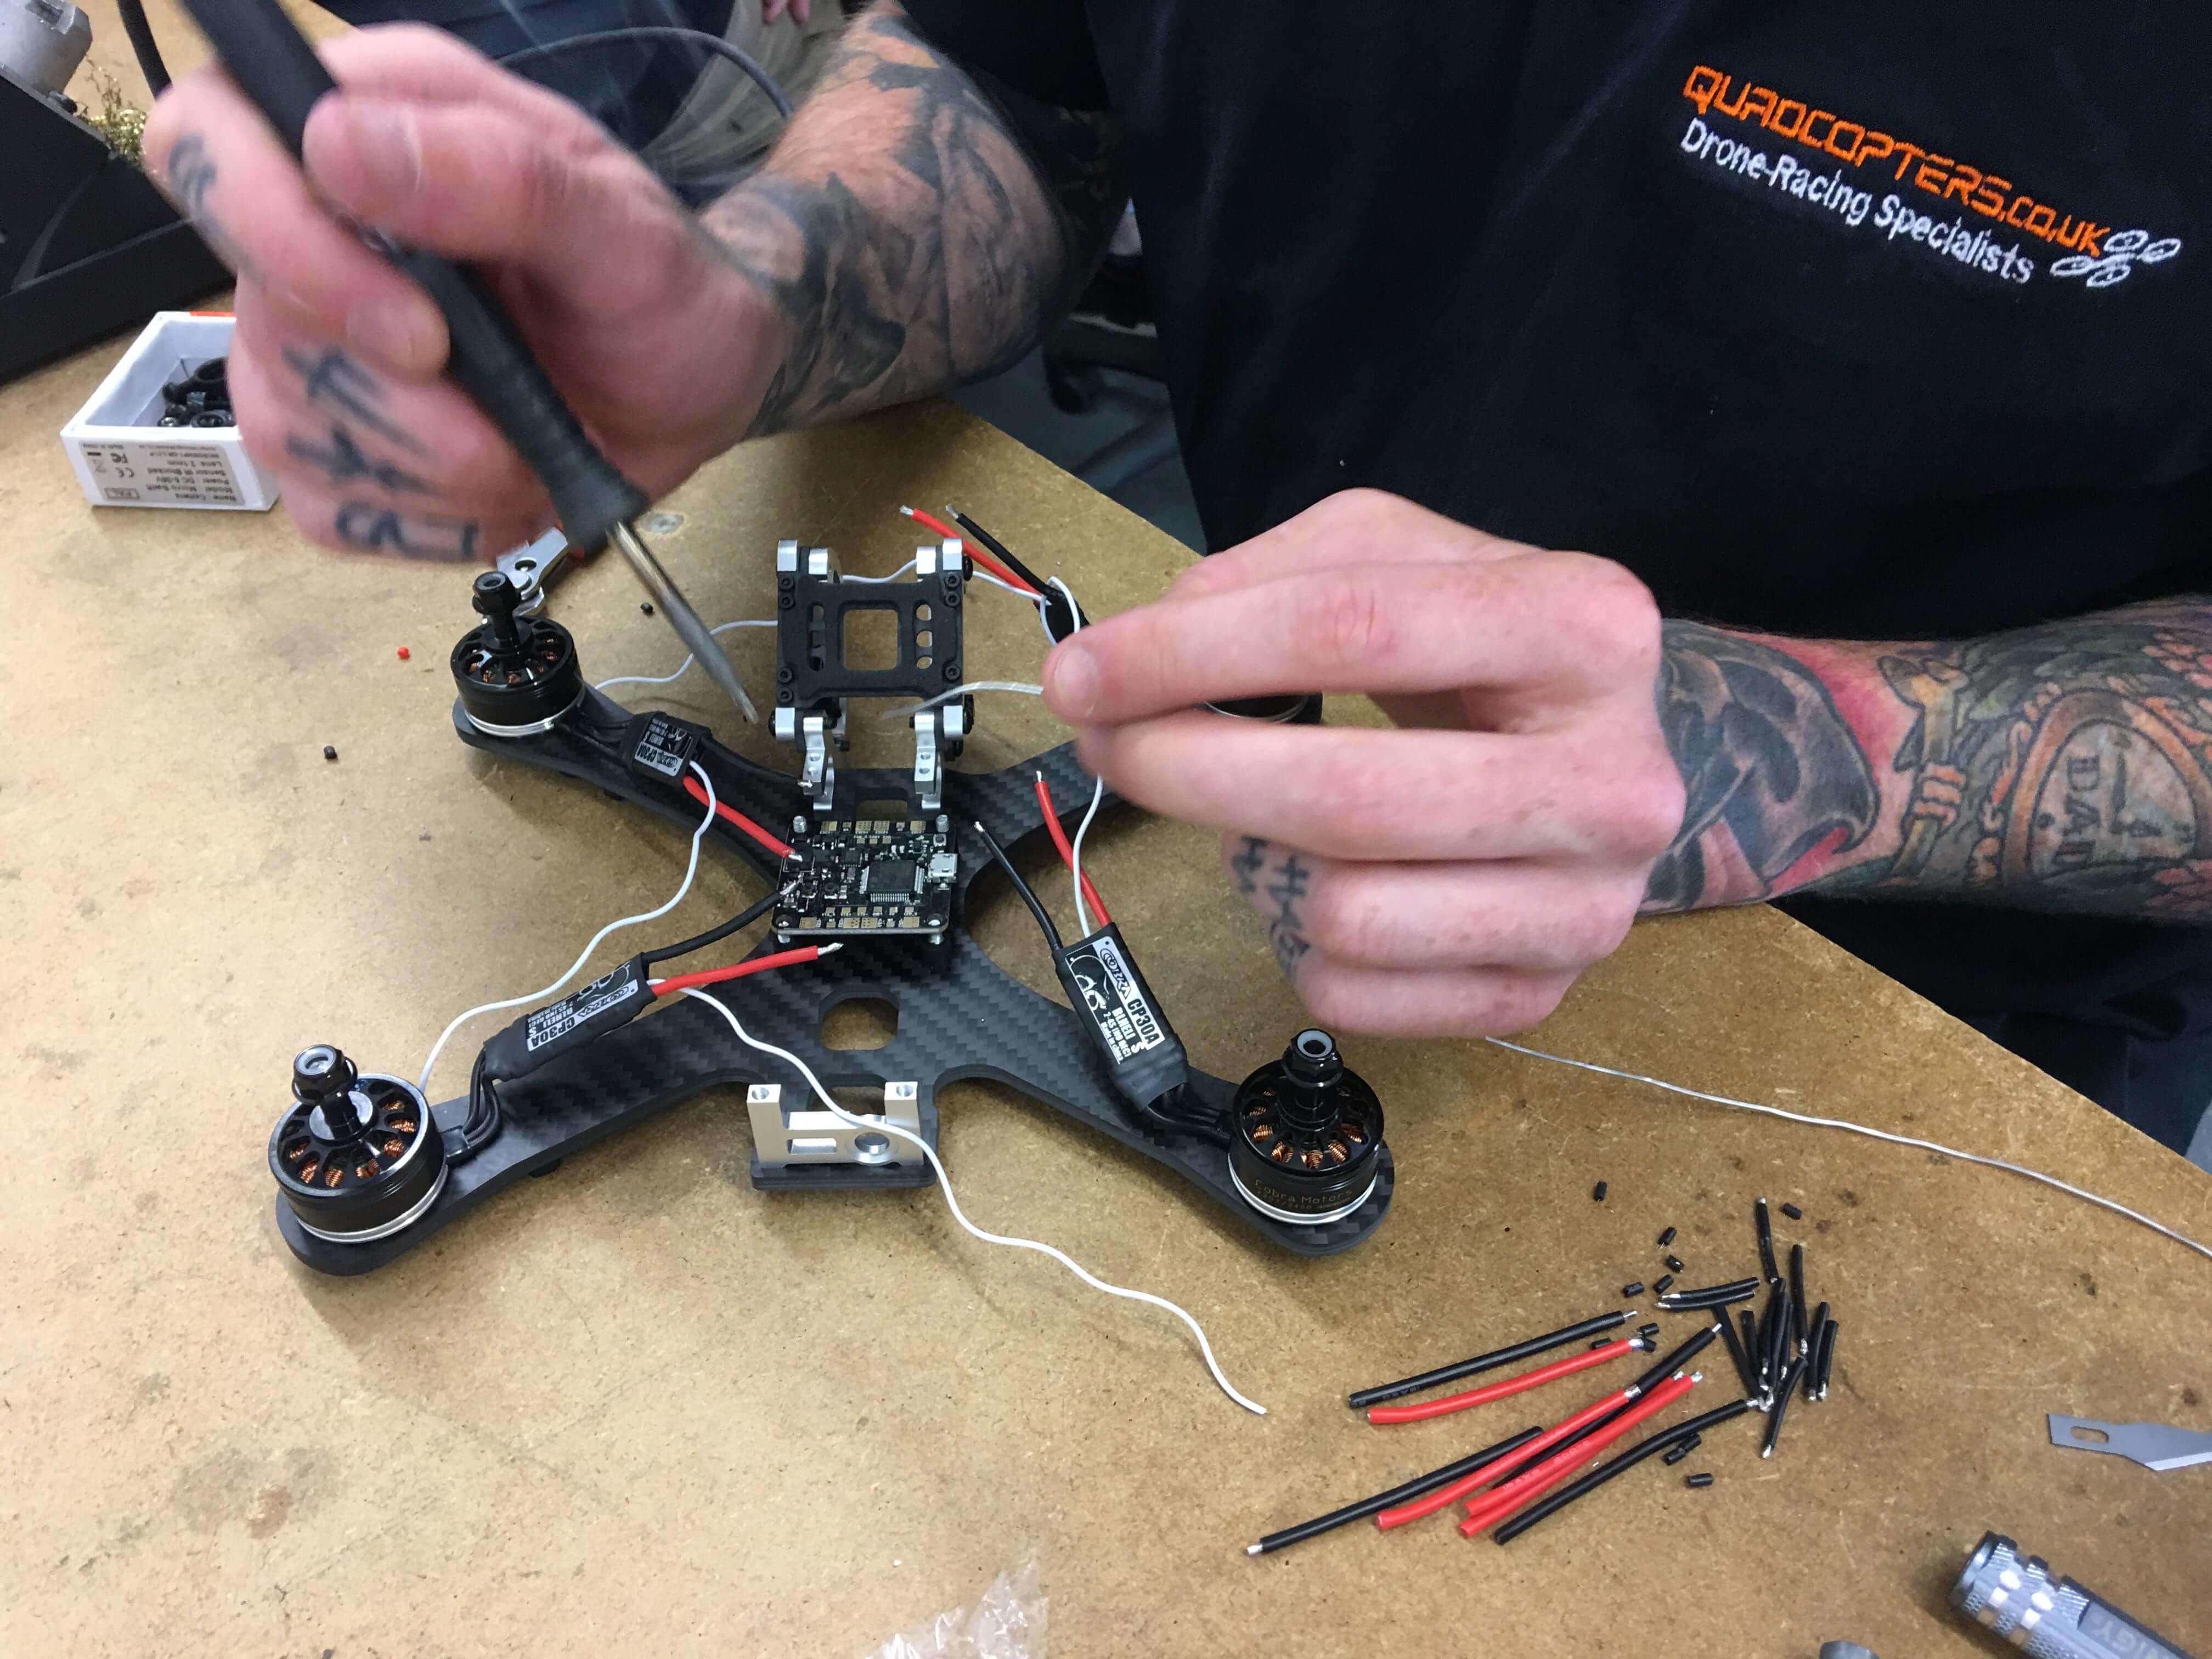 Tom Smith FPV soldering esc's to CL Racing F4 FC